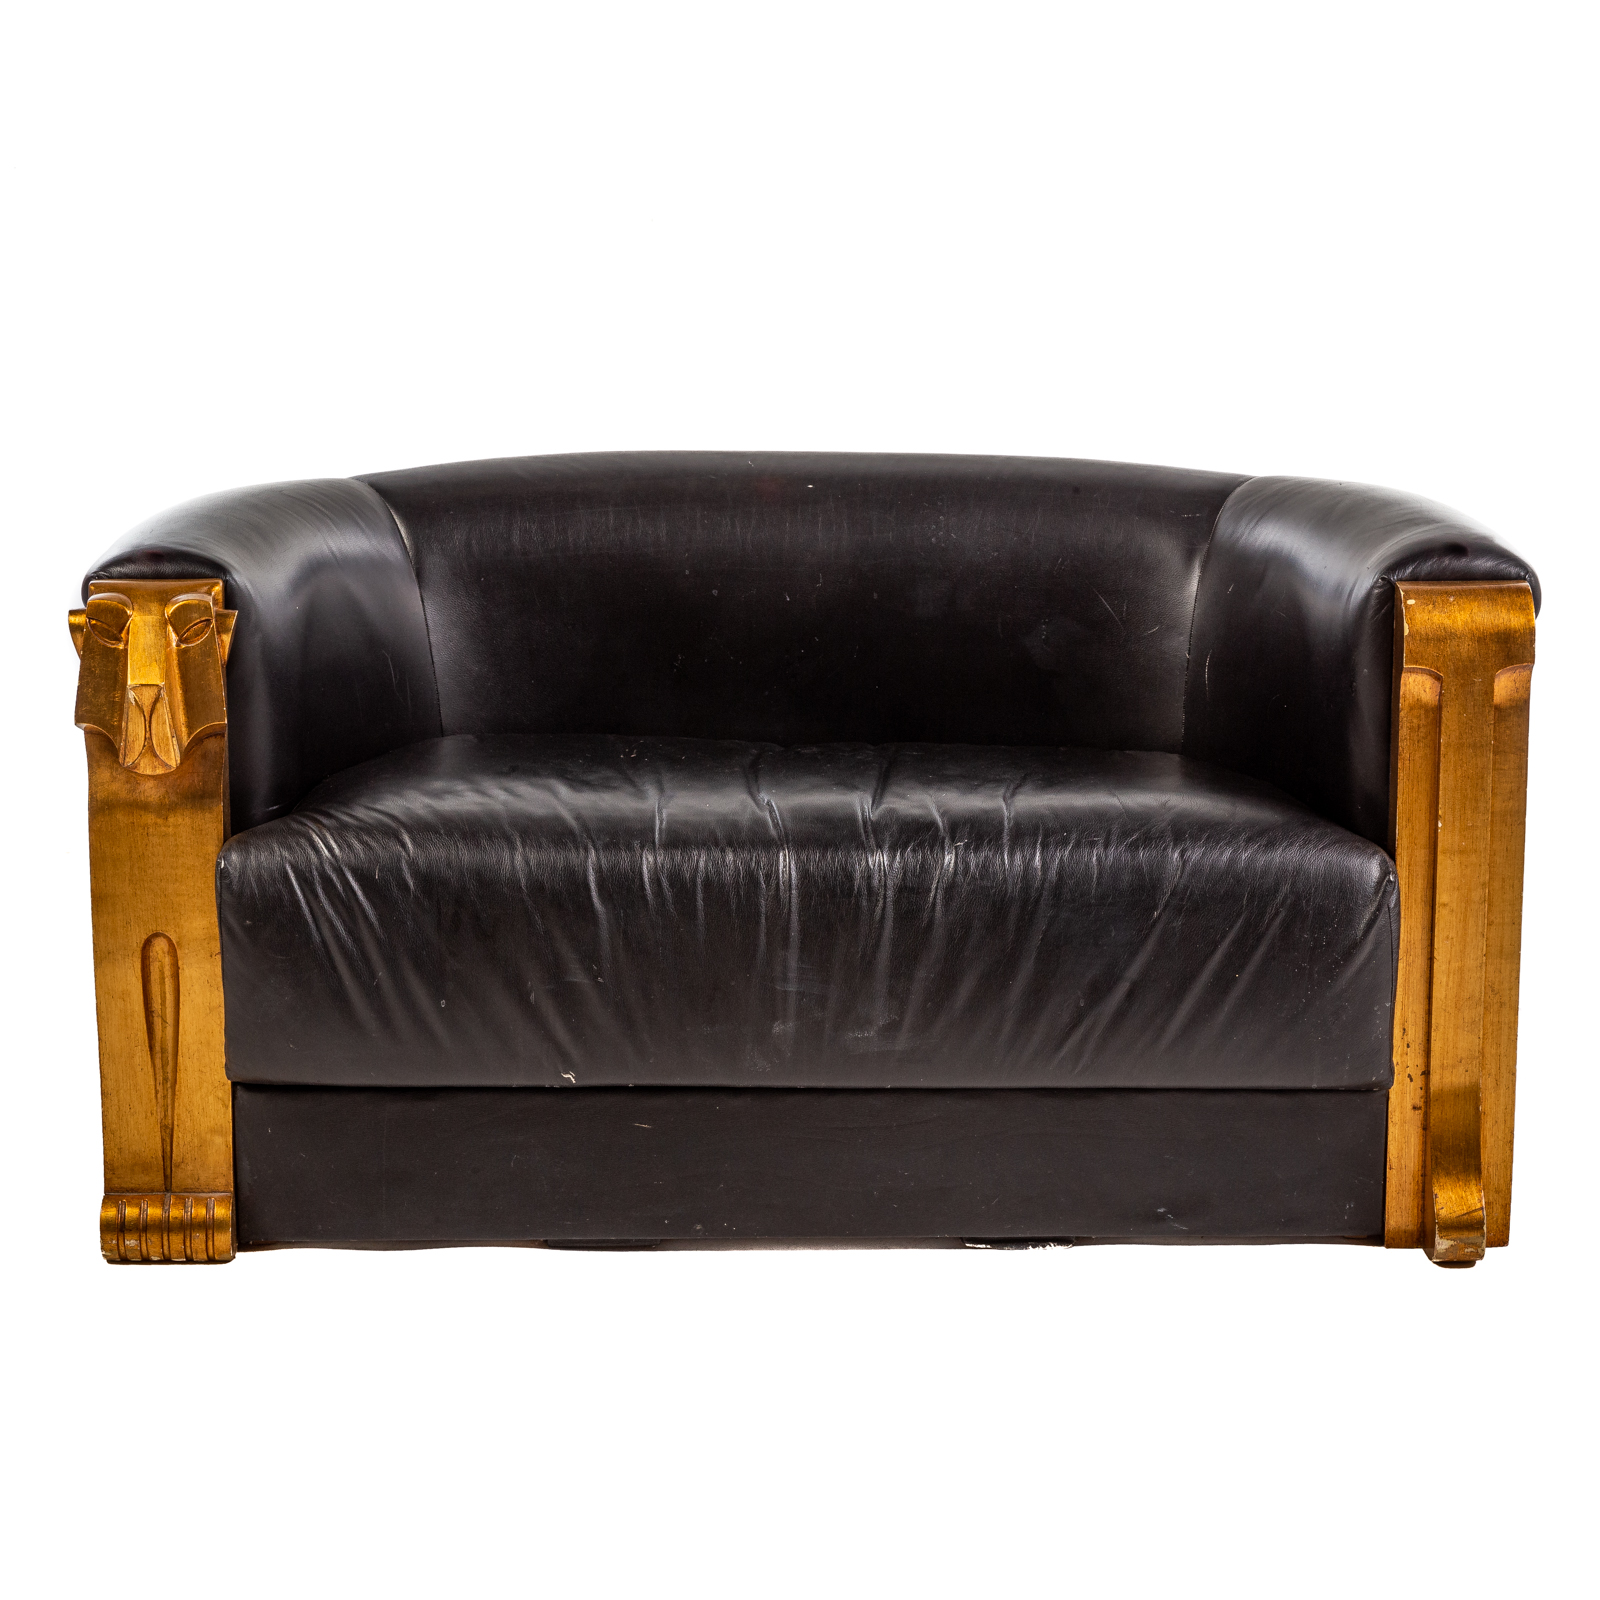 ART DECO STYLE LEATHER LOVESEAT 36a8db